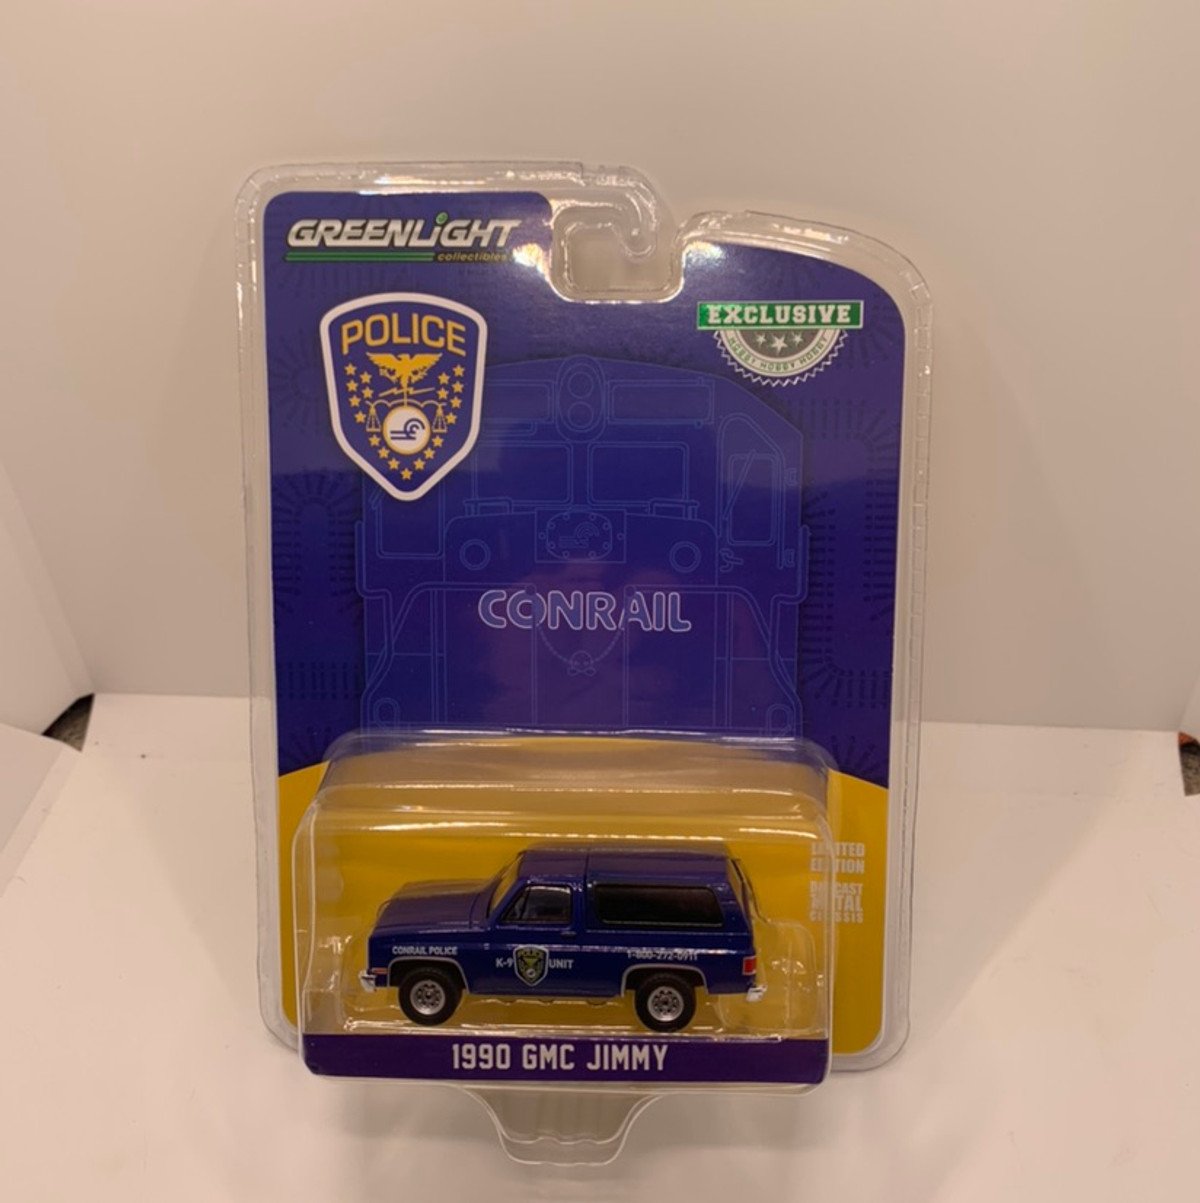 Greenlight Conrail Police K-9 Unit 1990 GMC Jimmy Hobby Exclusive 